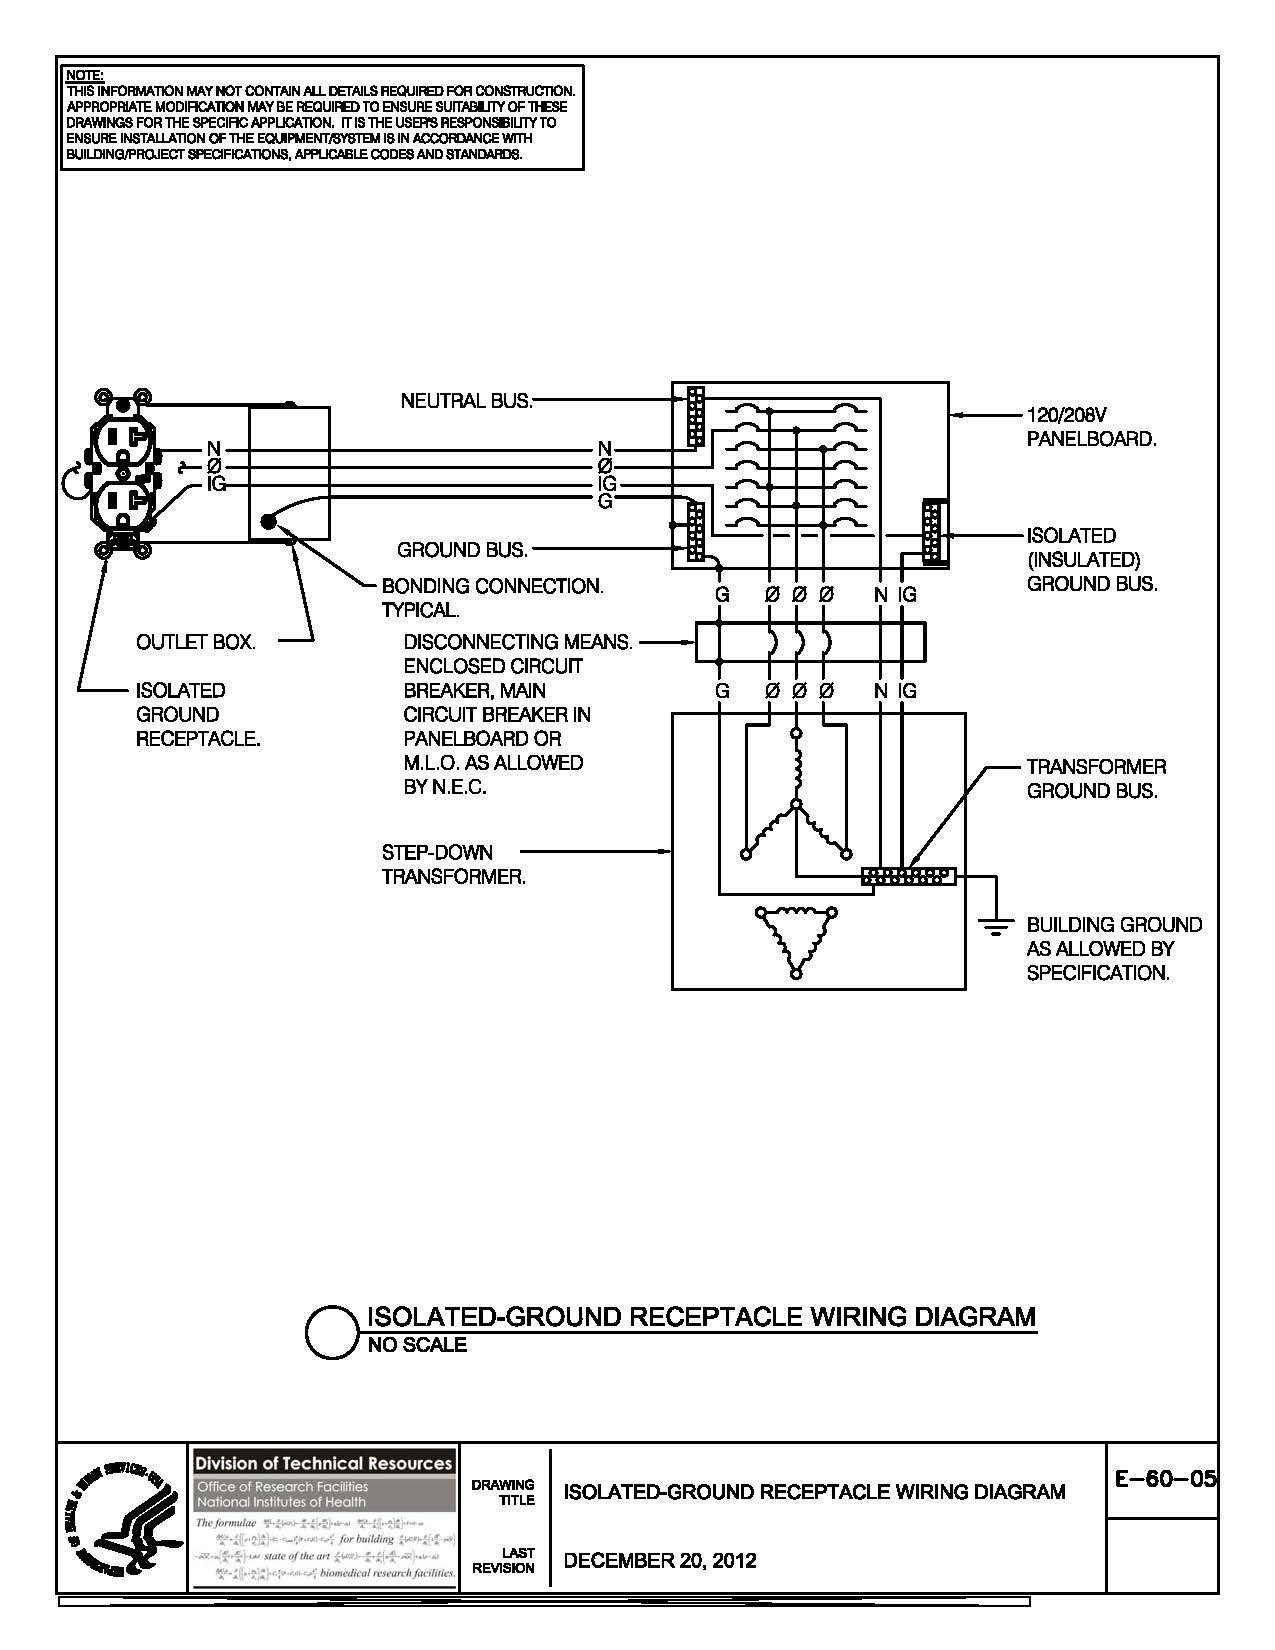 pad mount transformer wiring diagram Collection of E 60 05 Isolated Ground Receptacle Wiring Diagram DOWNLOAD Wiring Diagram